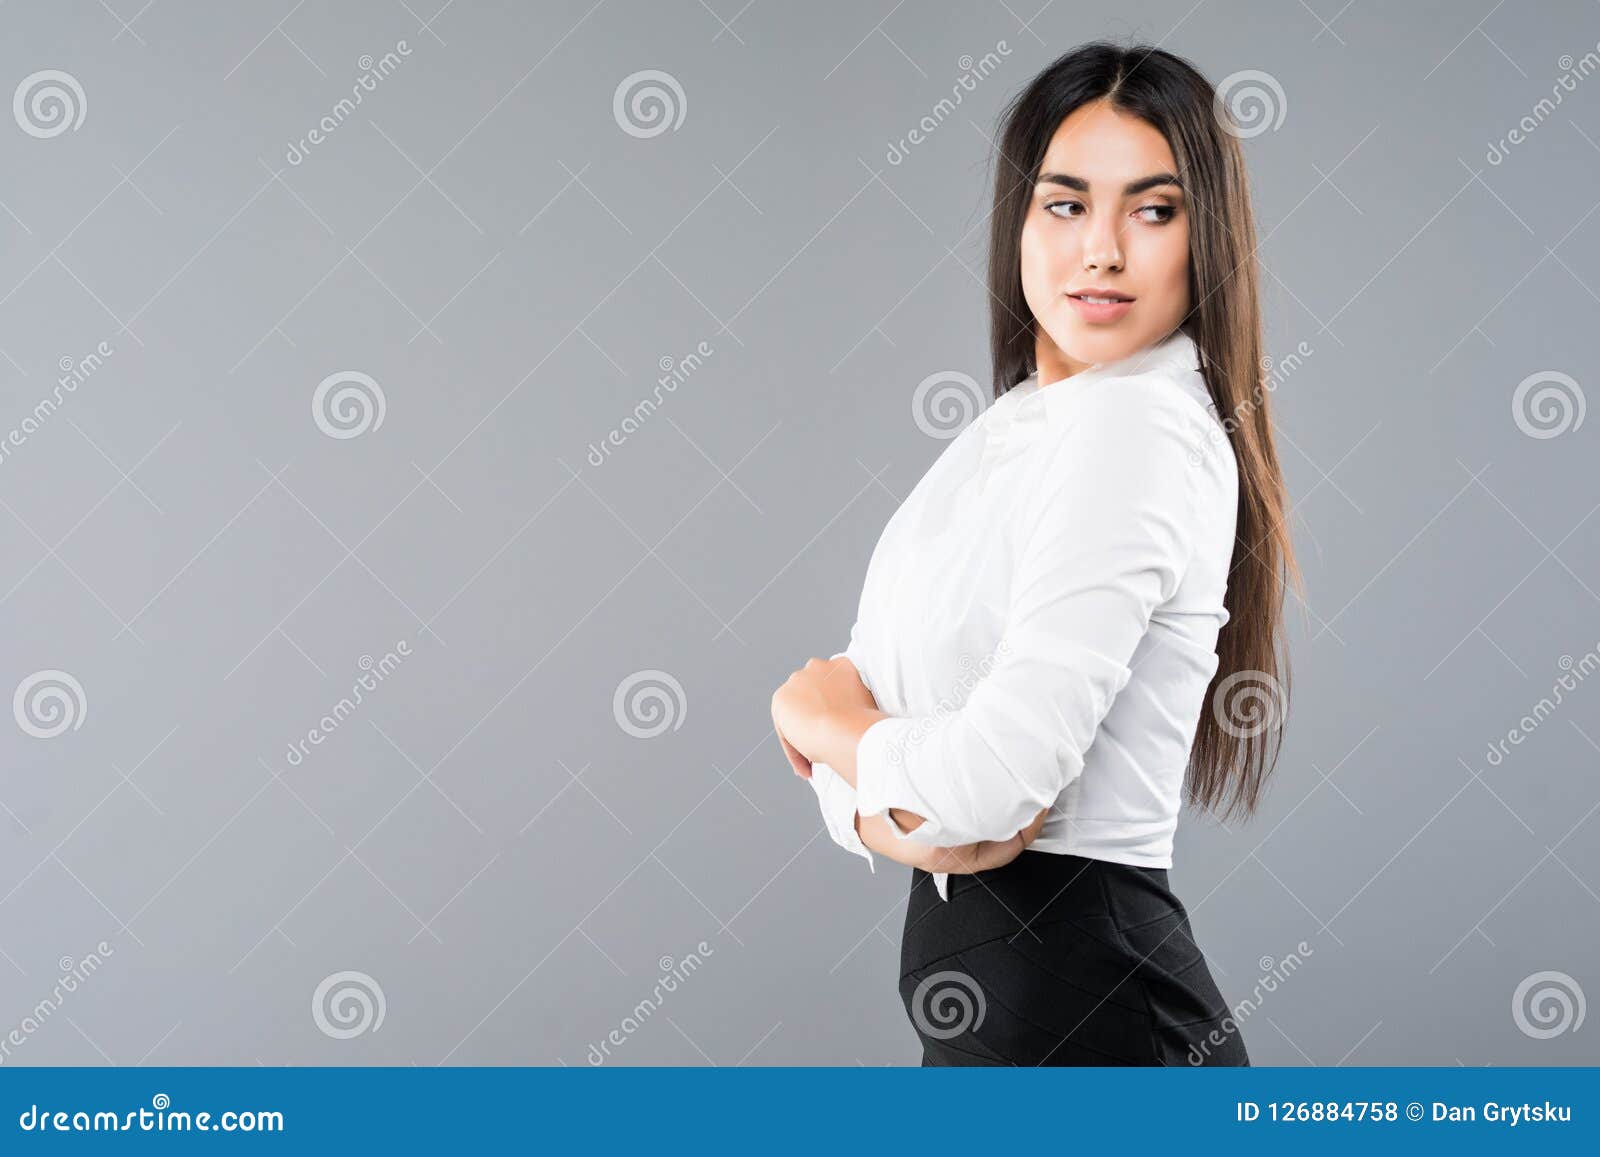 closeup profile of confident business woman looking forward  on gray background